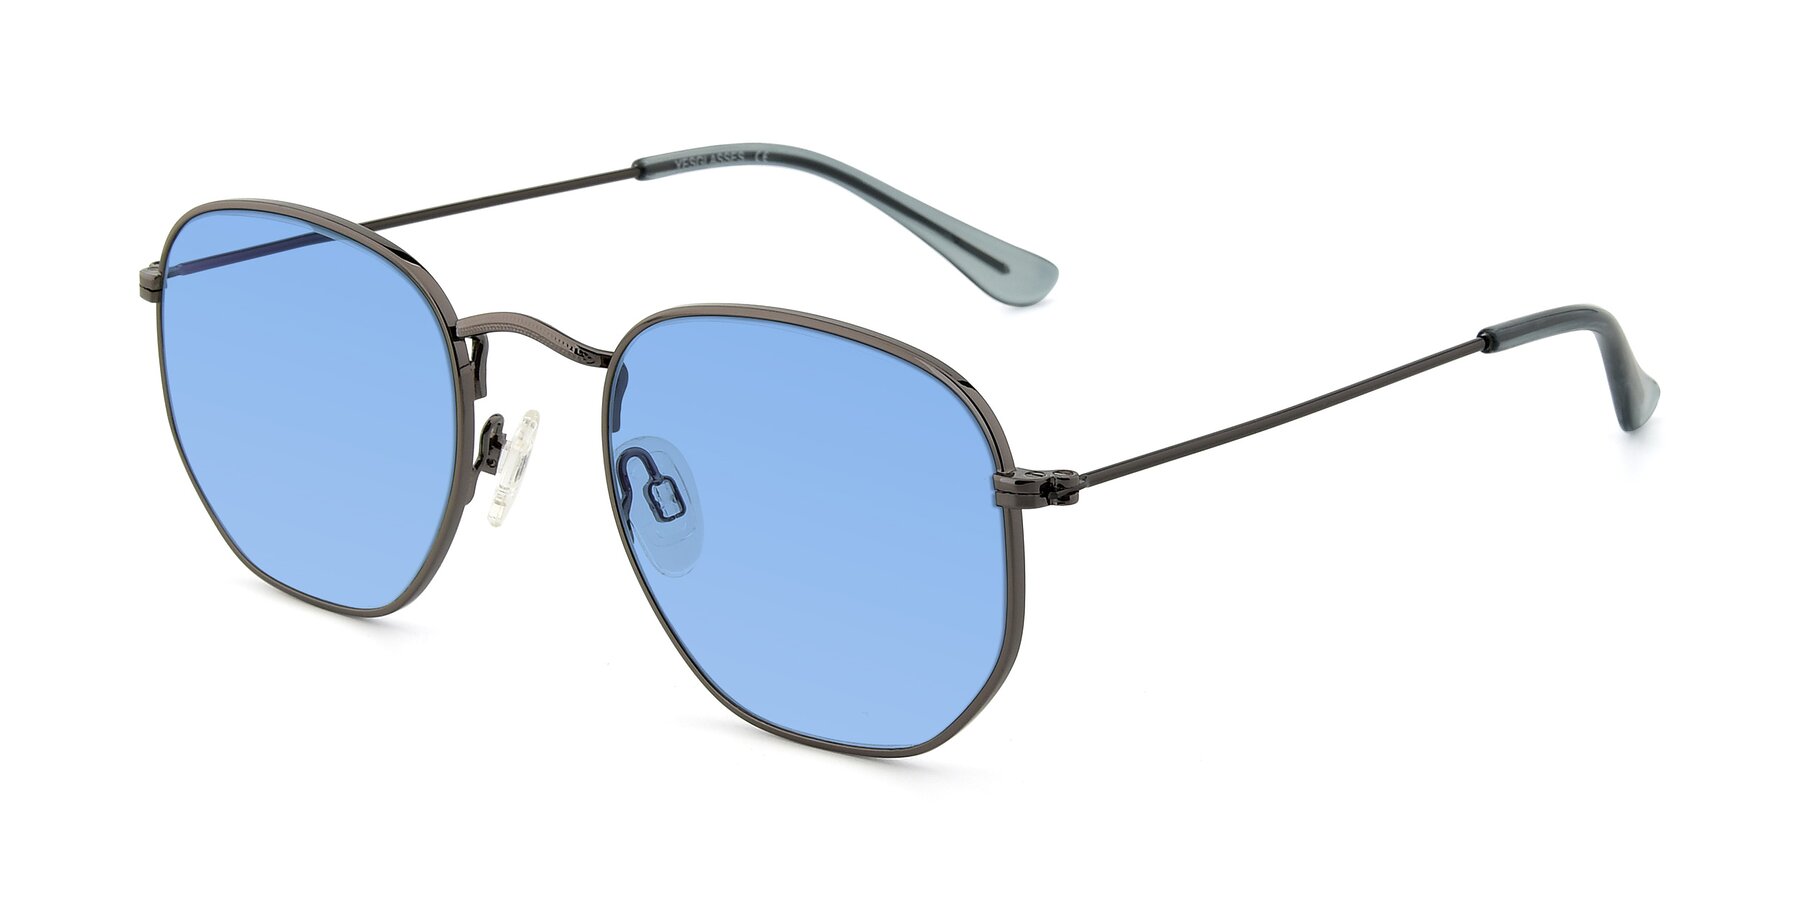 Angle of SSR1944 in Grey with Medium Blue Tinted Lenses